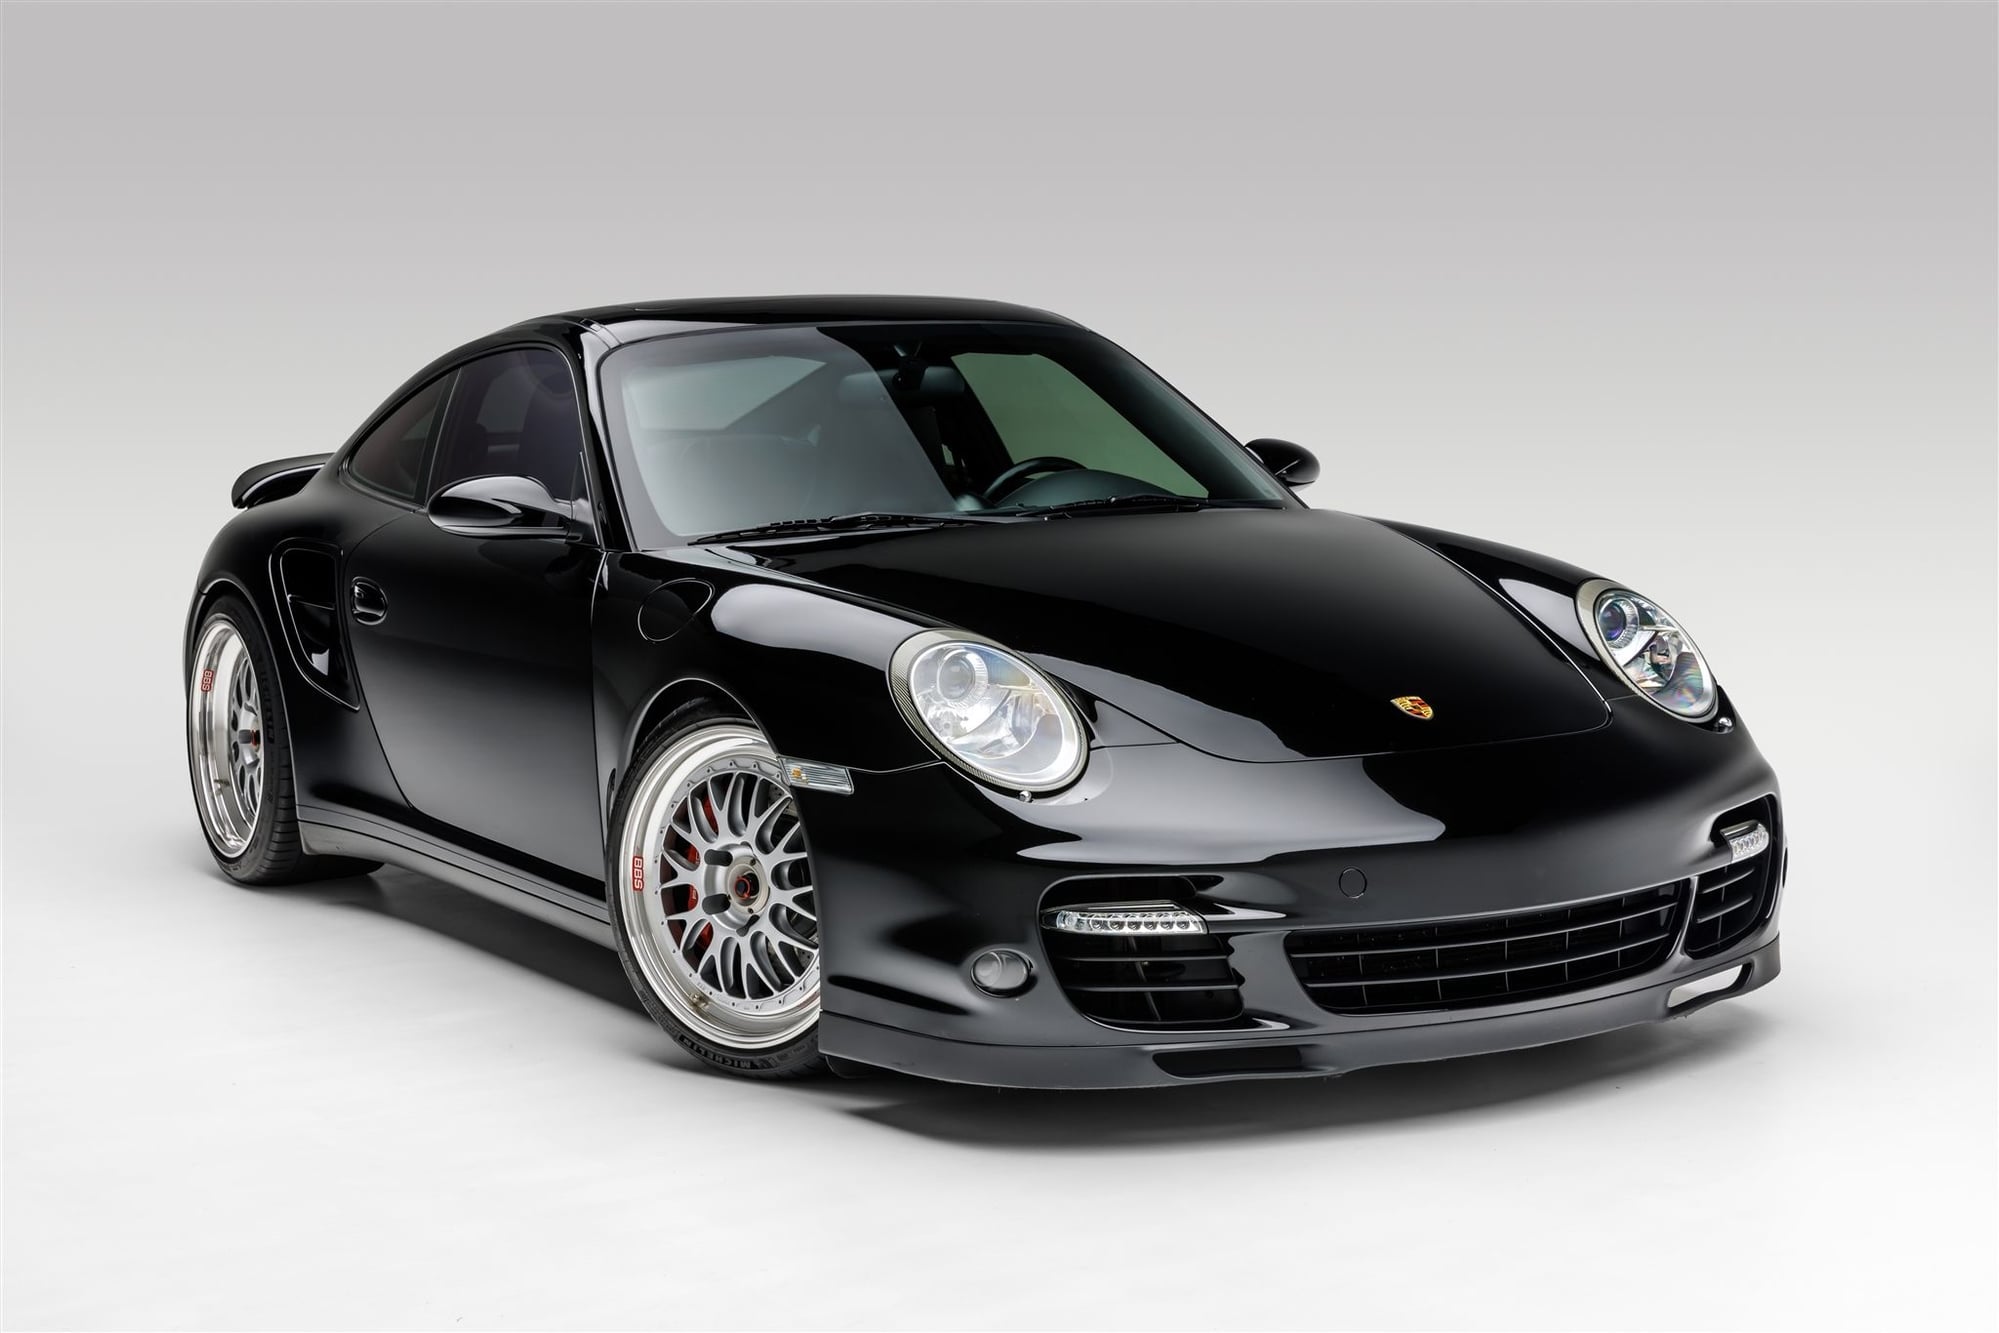 2008 Porsche 911 - 2008 Porsche 911 Turbo 6 Speed Manual 6MT 74K Tastefully Top Shelf Modified - Used - VIN WP0AD299X8S783334 - 73,700 Miles - 6 cyl - AWD - Manual - Coupe - Black - Irvine, CA 92602, United States